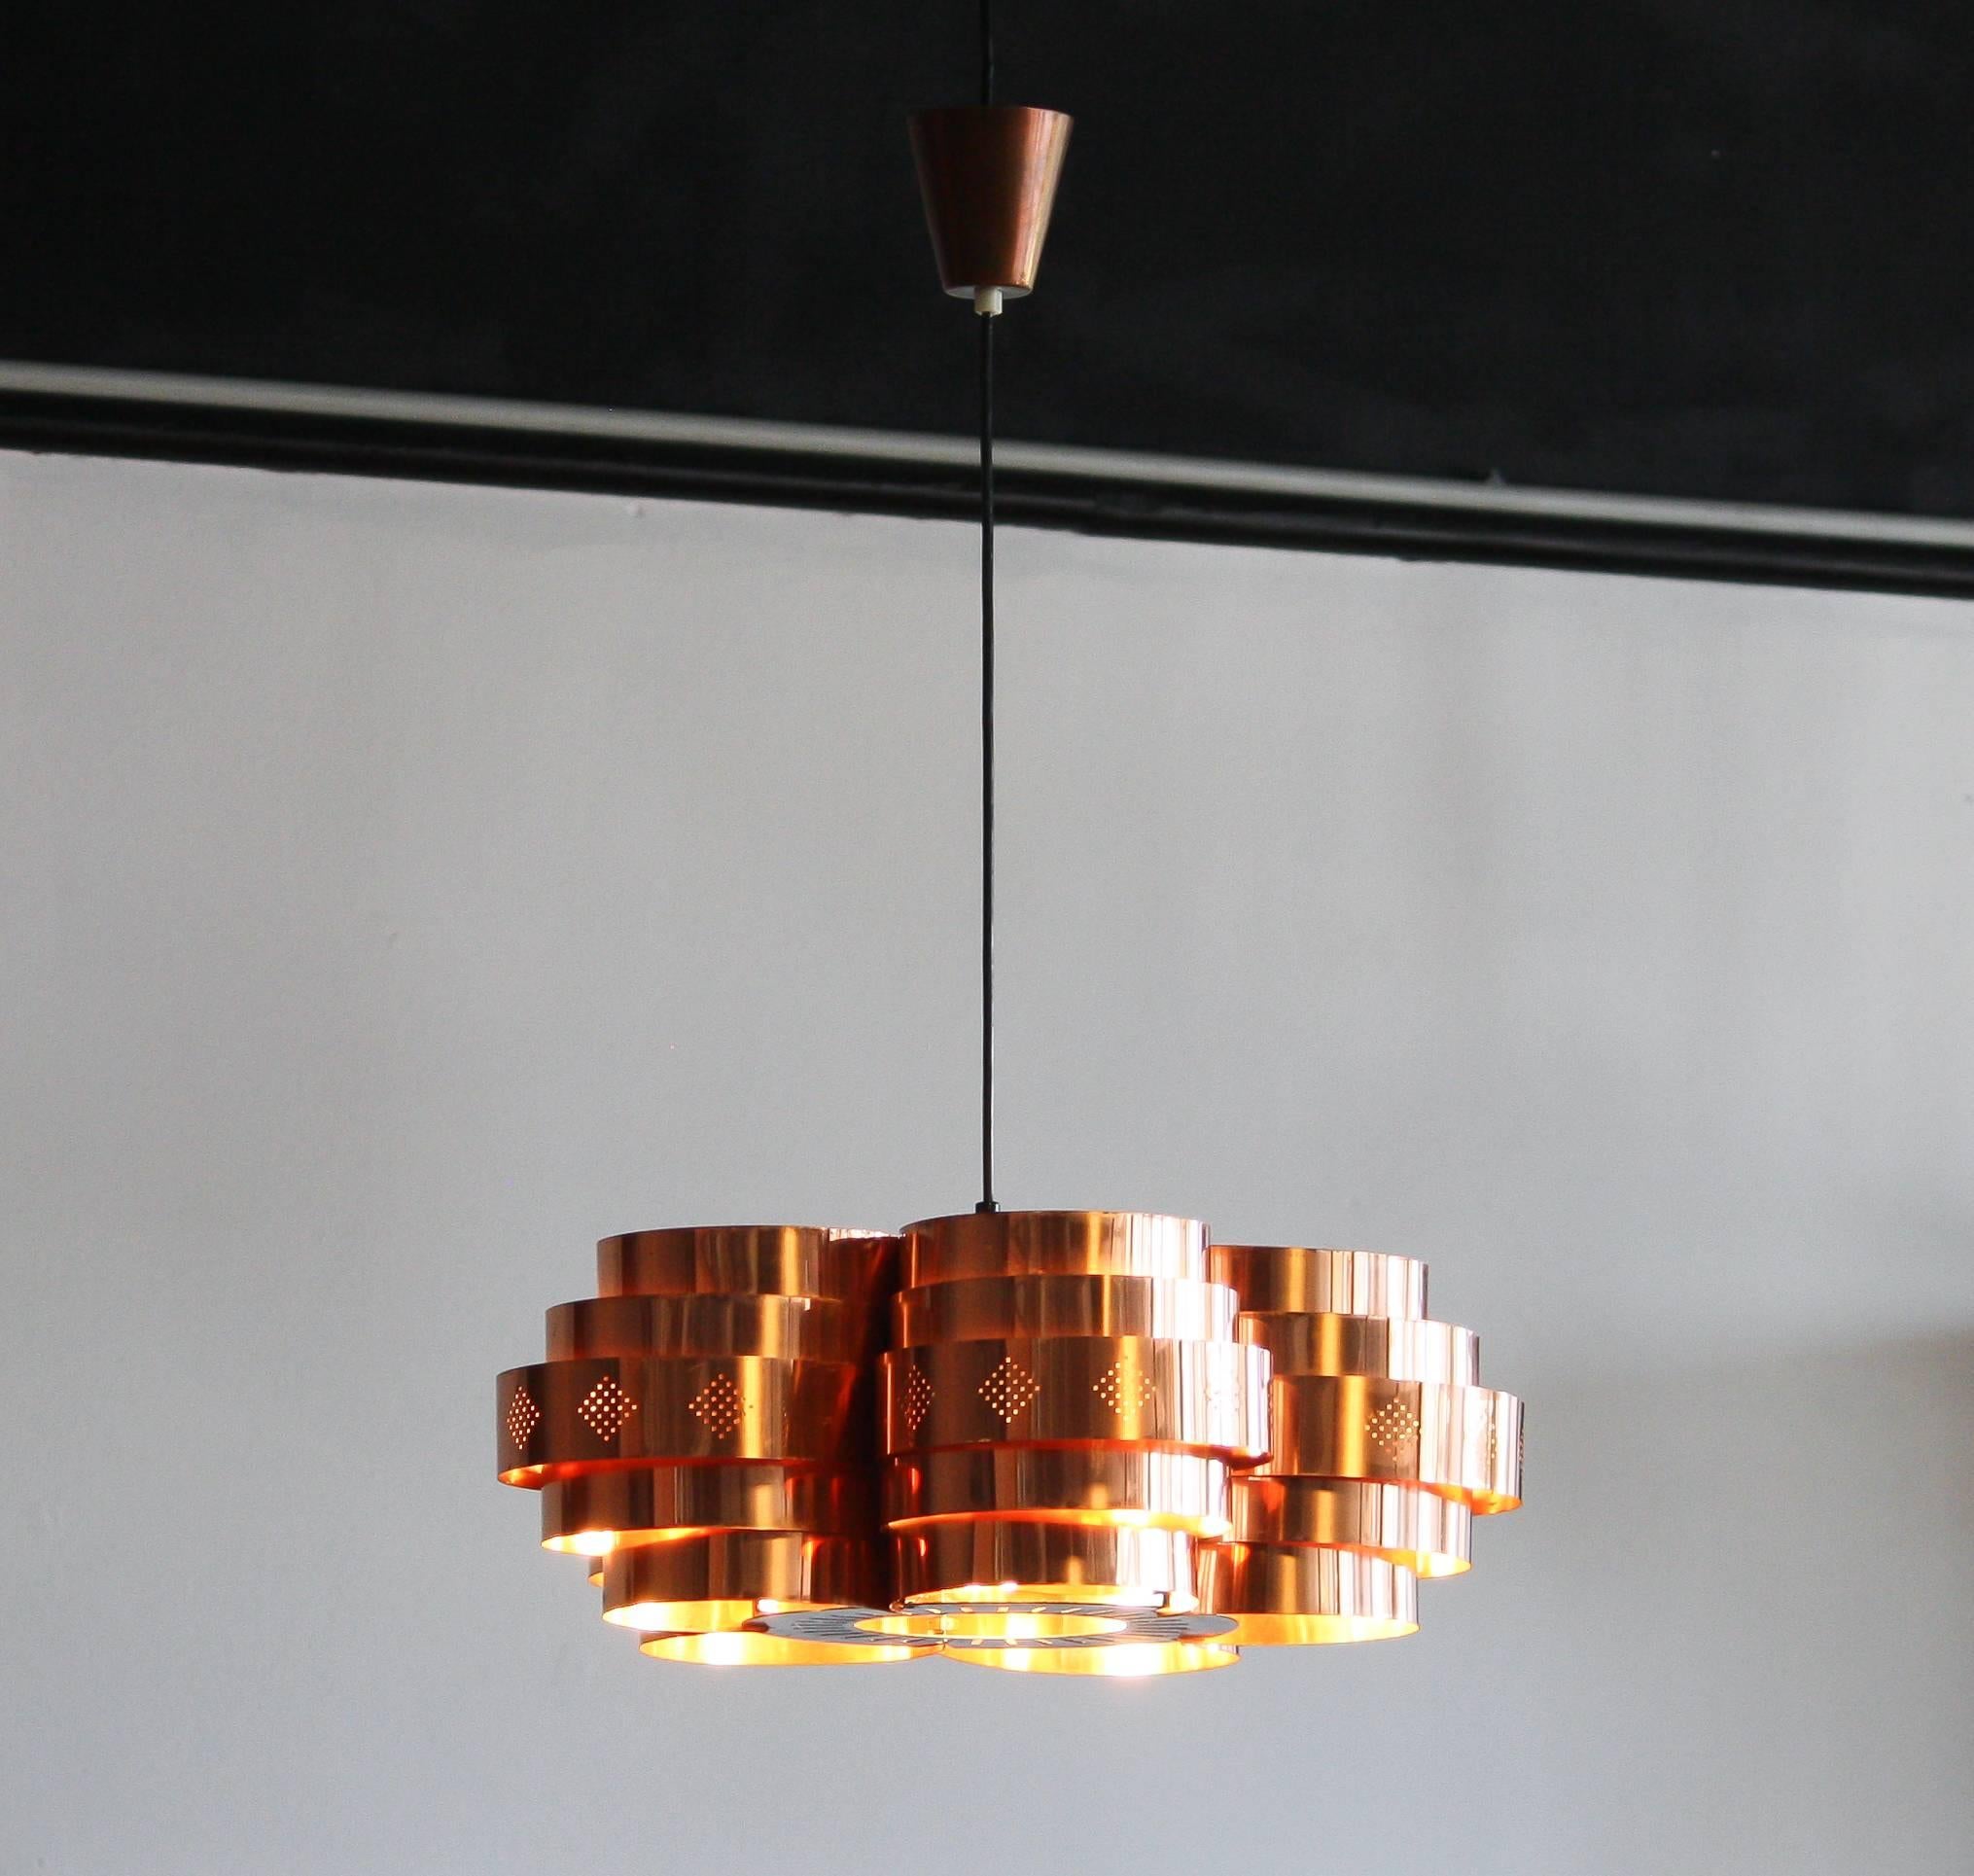 Beautiful copper pendant designed by Verner Schou and manufactured by Coronell Elektro, Denmark.
The lamp has a fabulous four leaf clover shape with five variable tiers with give a warm diffused lighting.
Period 1960s
Dimensions: H. 19 cm, ø 50